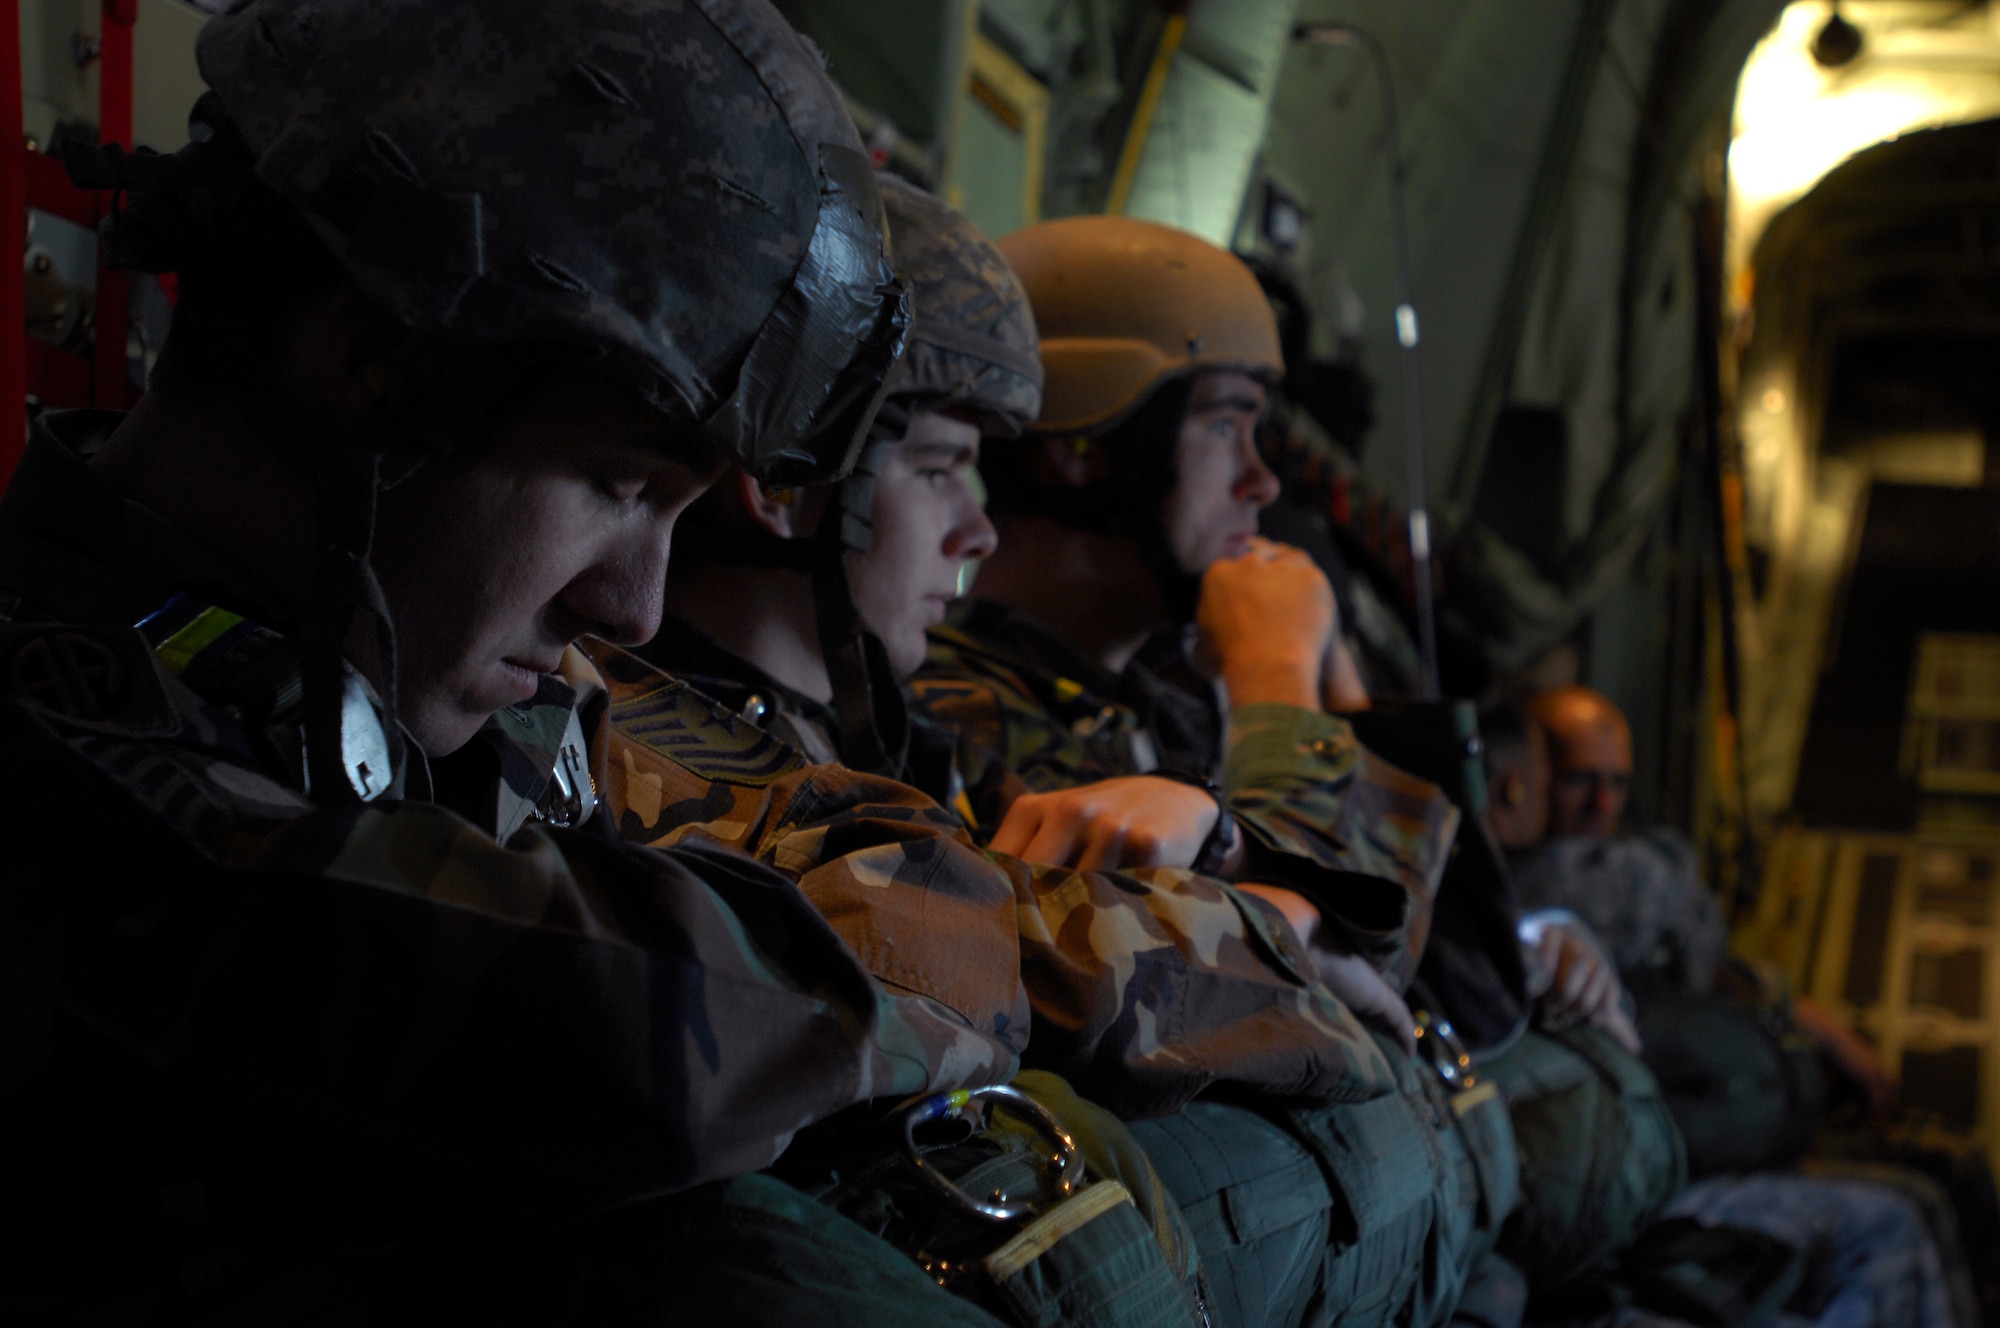 United States Air Force and Army paratroopers prepare for take off on Ramstein's new C-130J for the first Super Hercules personnel drop, May 4, 2009 Ramstein Air Base, Germany. (U.S. Air Force photo by Senior Airman Kenny Holston)